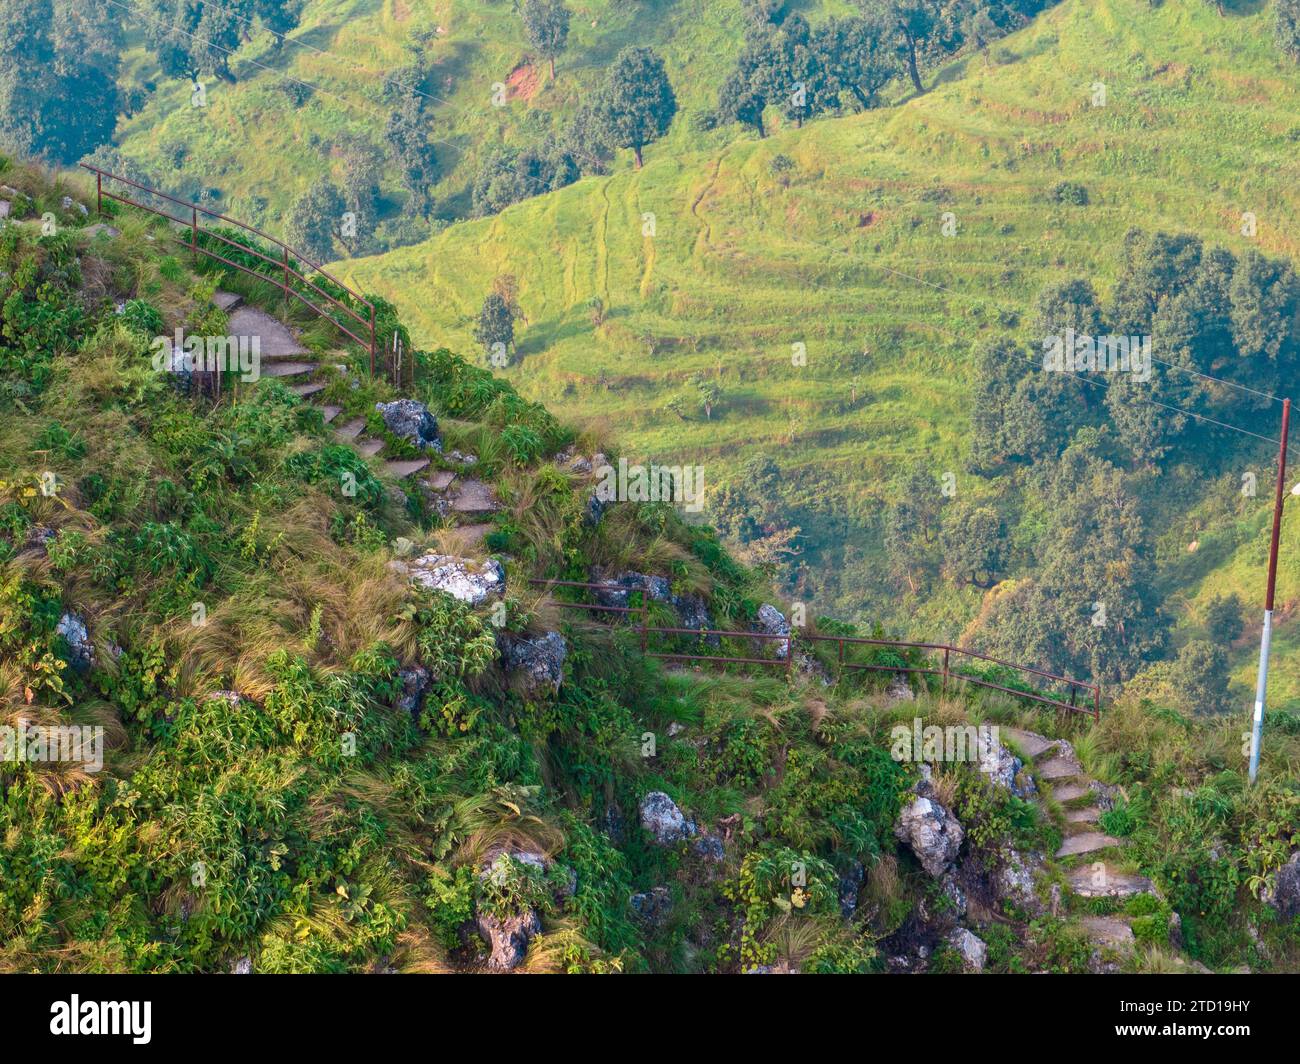 Aerial view of the hill of Thani mai temple, close to Bandipur, Nepal. Details of the stepped path leading to the top of the hill Stock Photo